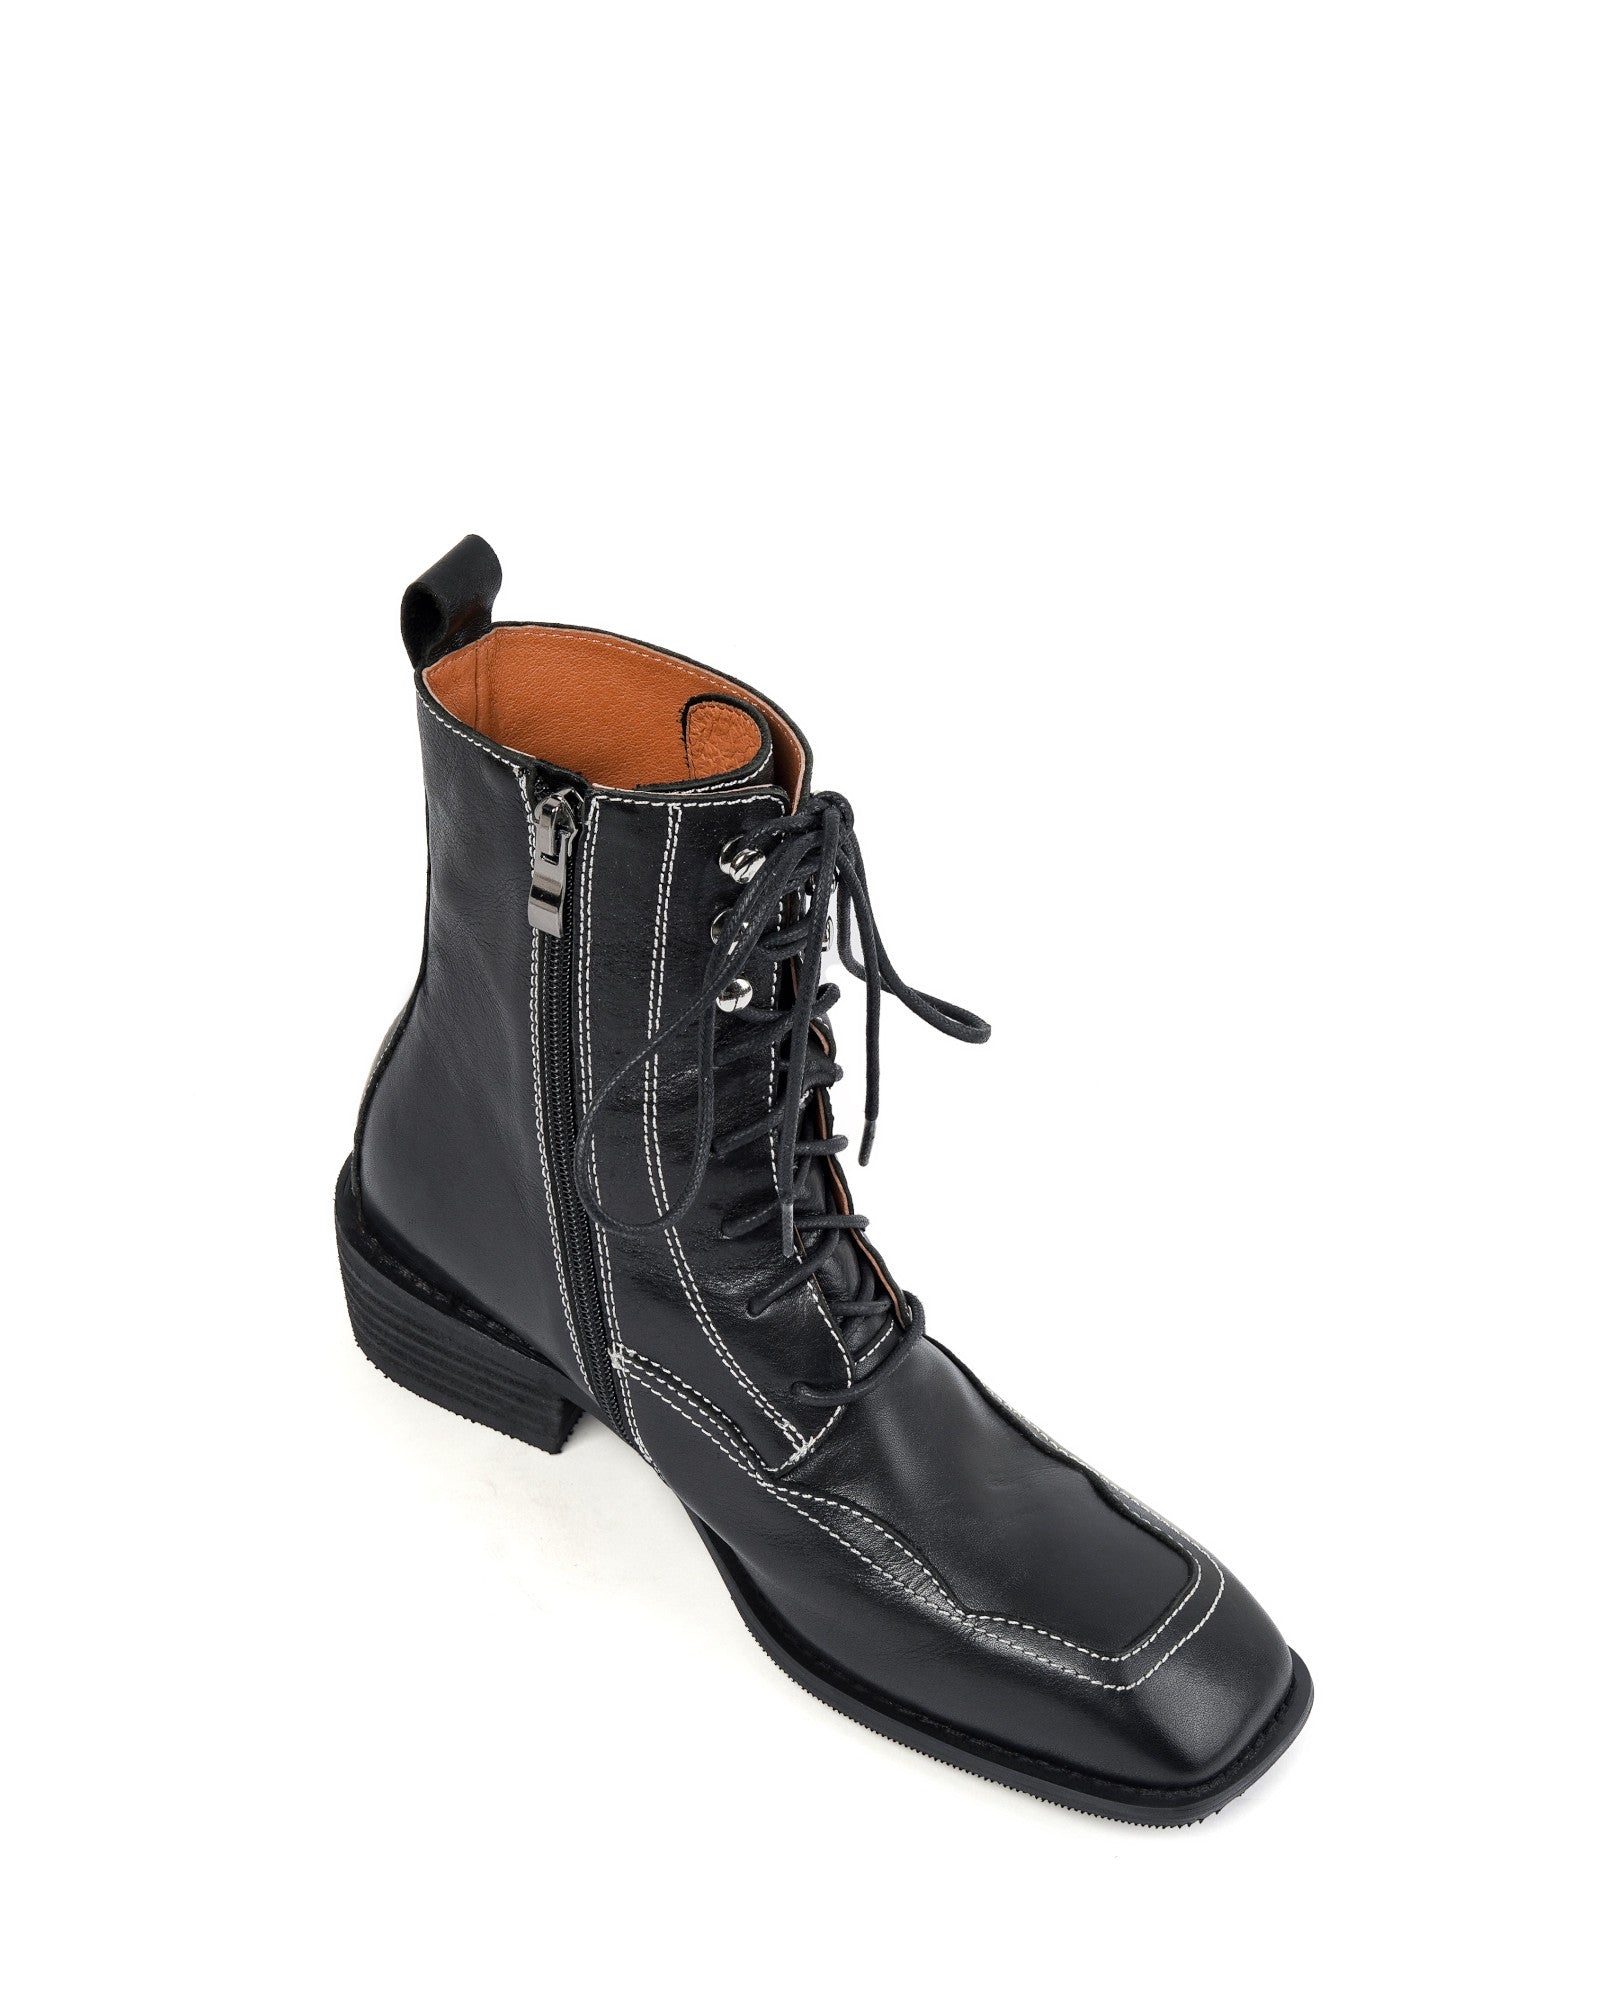 Foria-topstitching-leather-boots-2